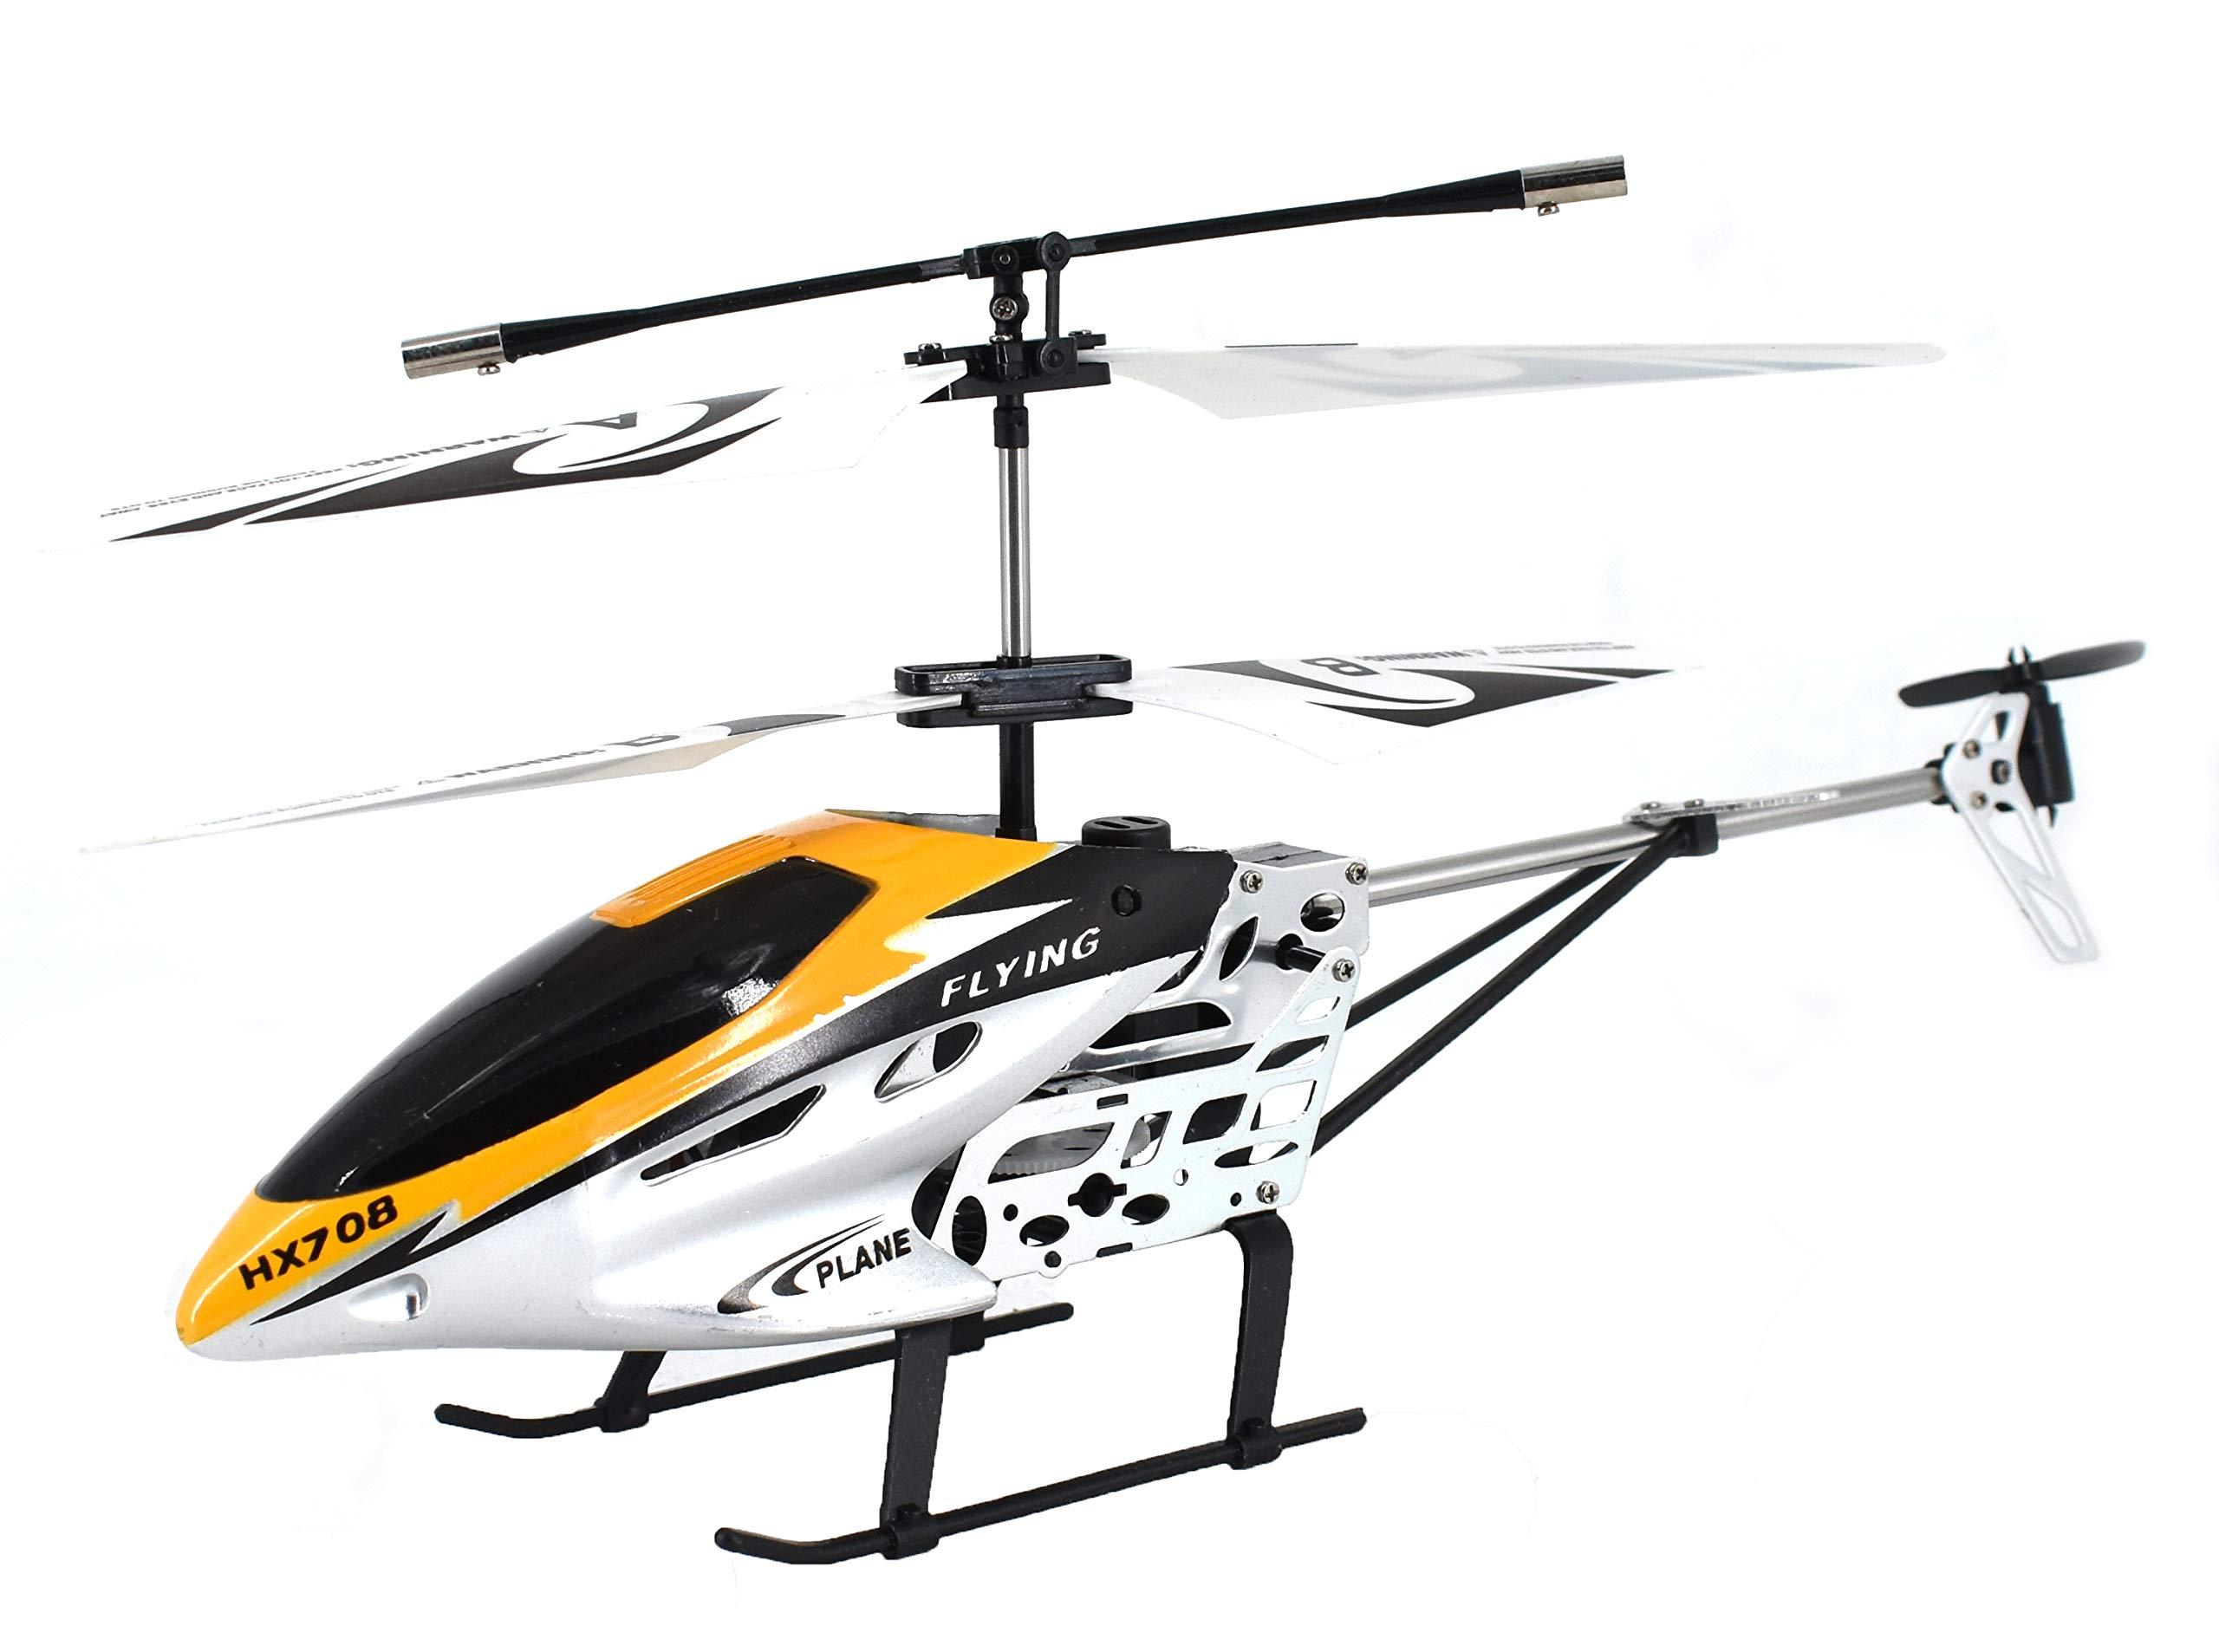 Remote Control Wale Helicopter: Flying a Remote Control Whale Helicopter: Challenges and Tips